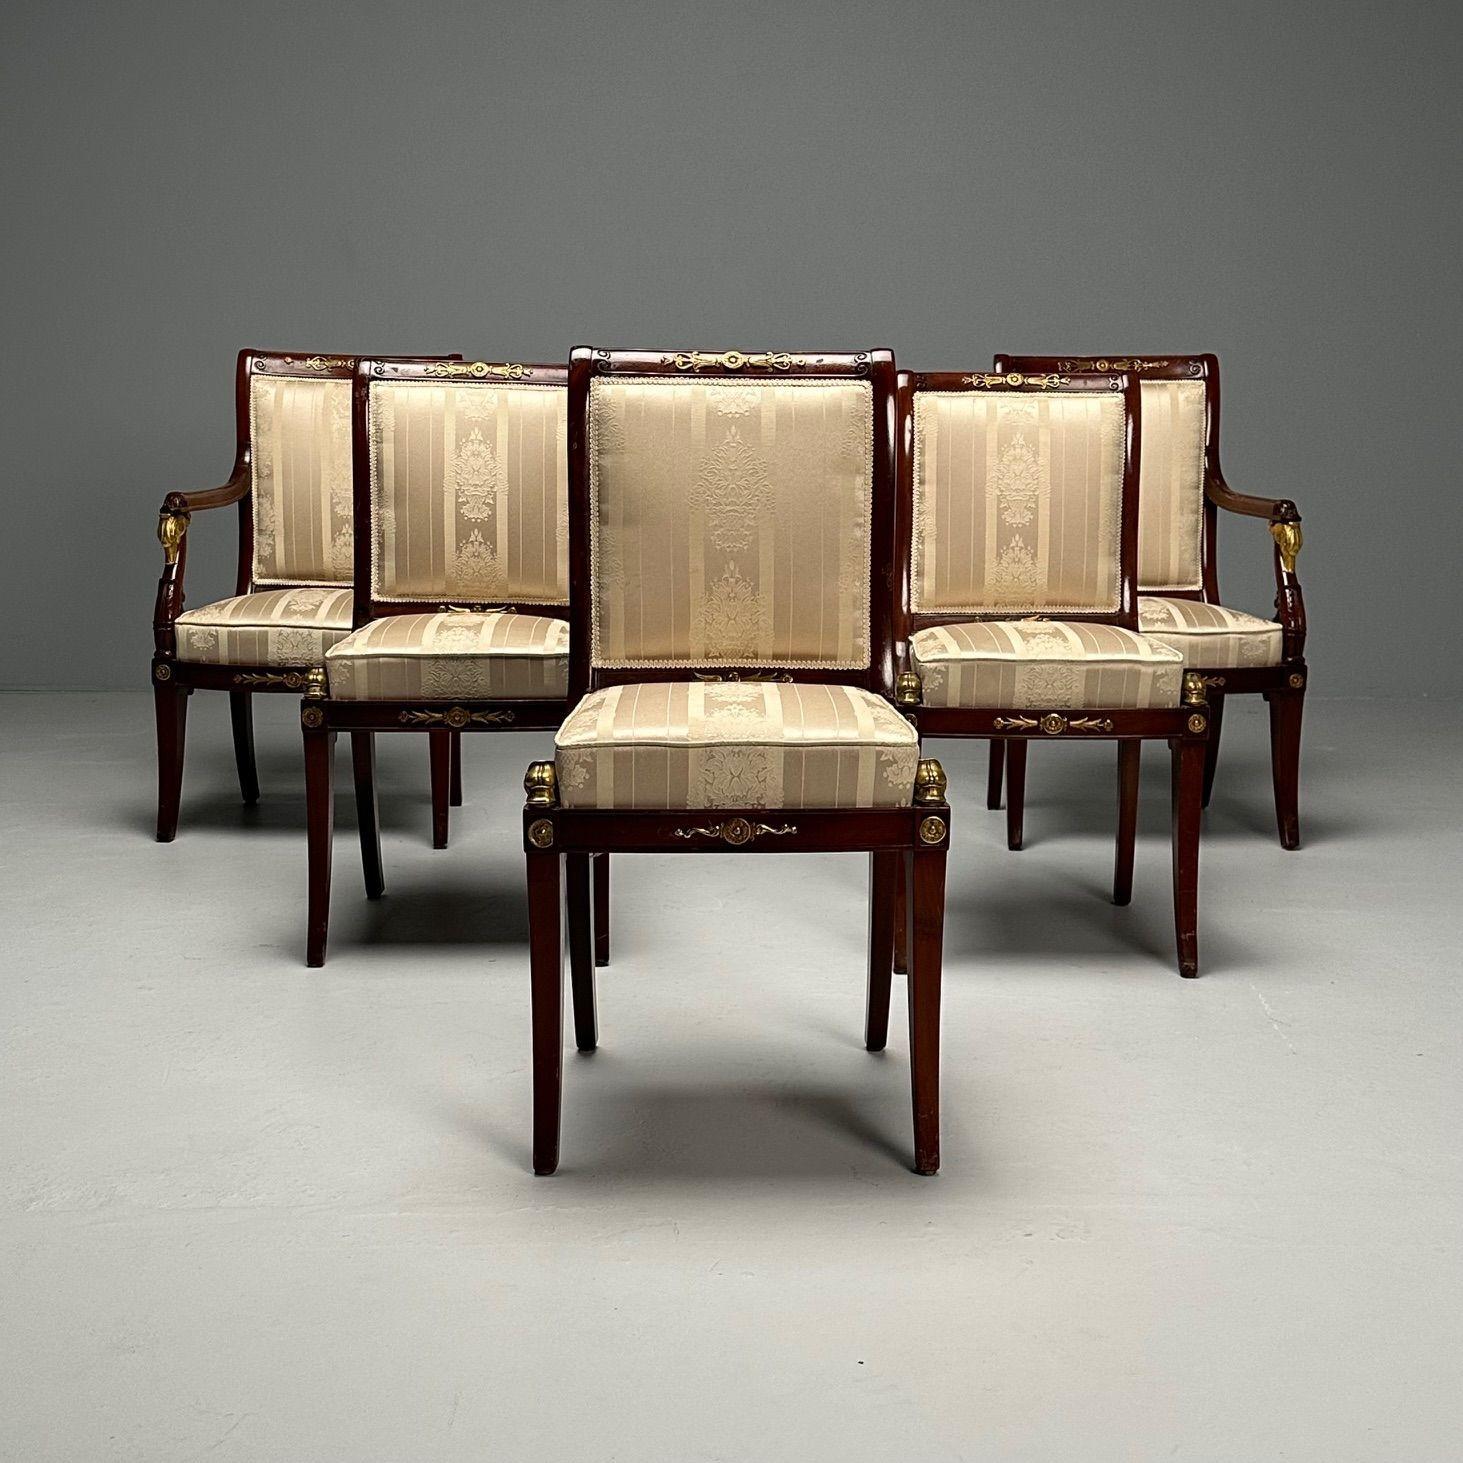 Russian Neoclassical, Six Dining Chairs, Mahogany, Bronze, Fabric, Sotheby's Provenance

A Set of Six Russian Neoclassical-Style, Gilt Bronze Mounted Mahogany Dining Chairs, 20th century. Commissions from a private residence by way of Sotheby's, New